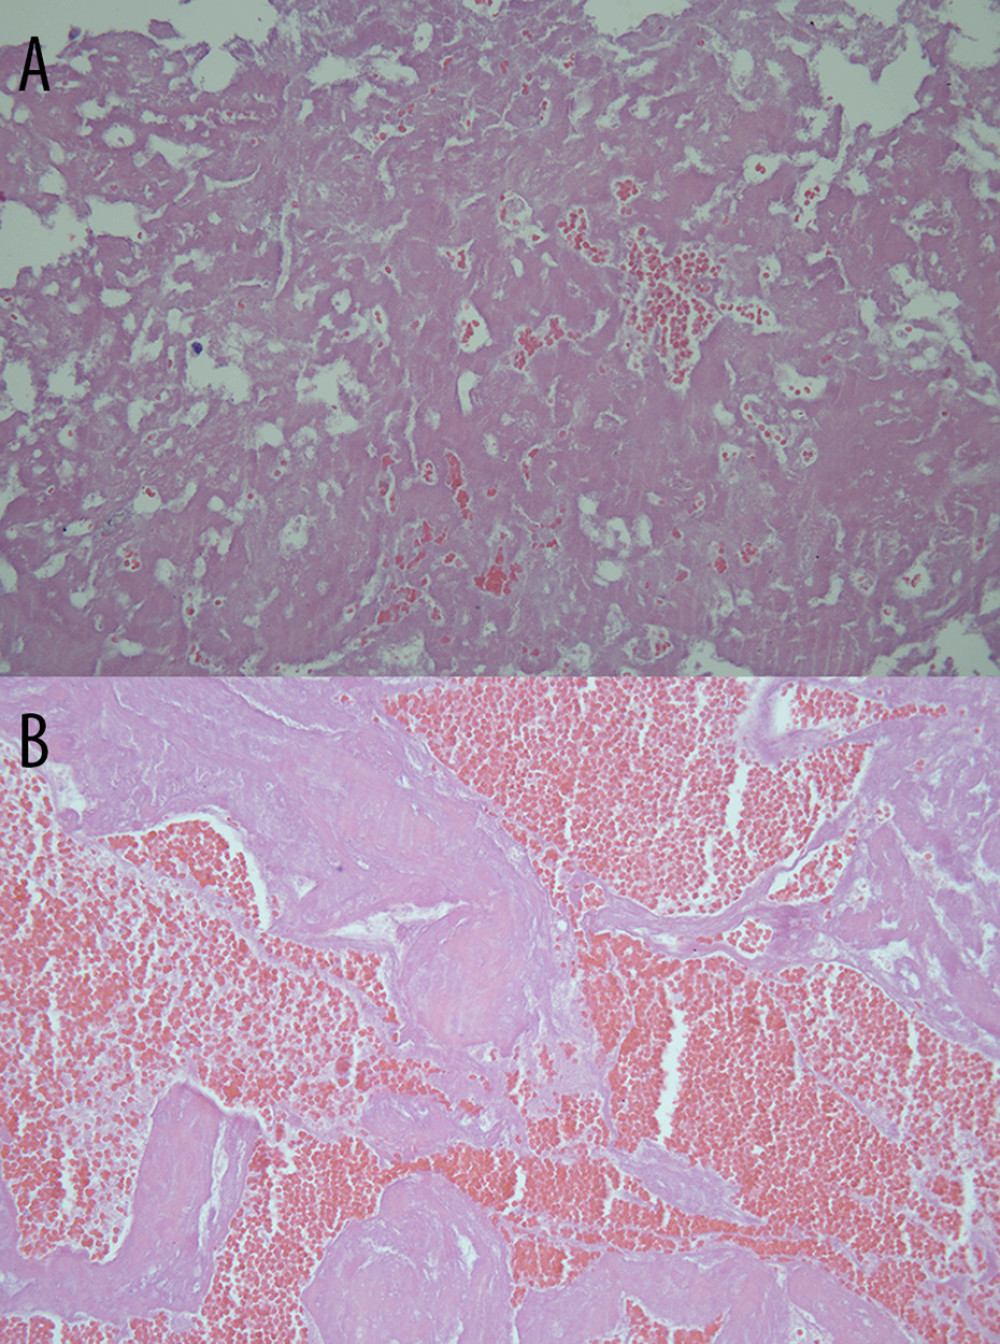 (A, B) A photomicrograph of the right atrial thrombus in a 47-year-old woman removed during open heart surgery. The histopathology shows degenerated fibrin, red blood cells suggestive of degenerated thrombus. Hematoxylin and eosin stain, ×400.